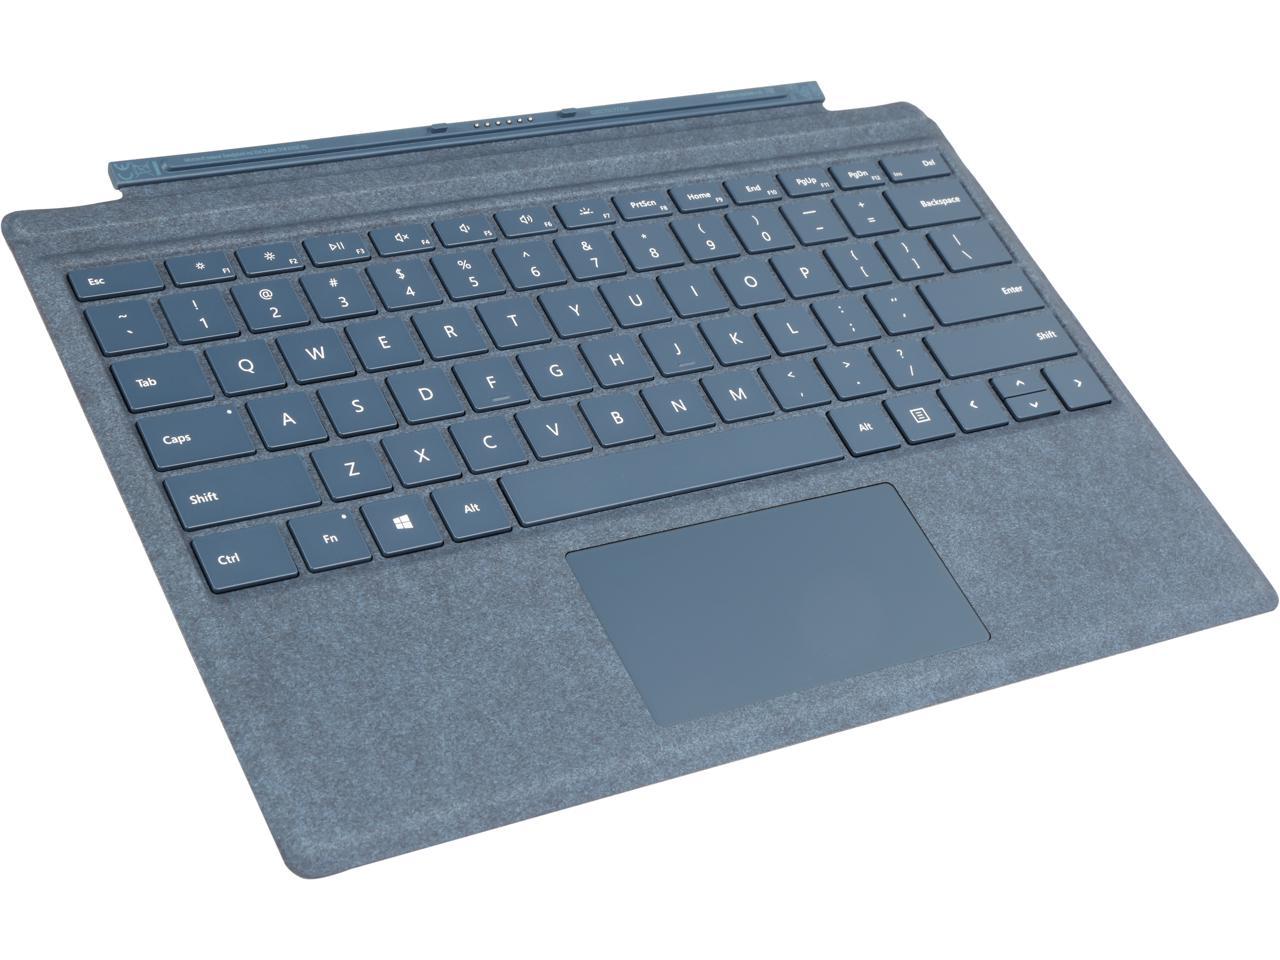 Used - Very Good: Microsoft Surface Pro Signature Type Cover - Cobalt